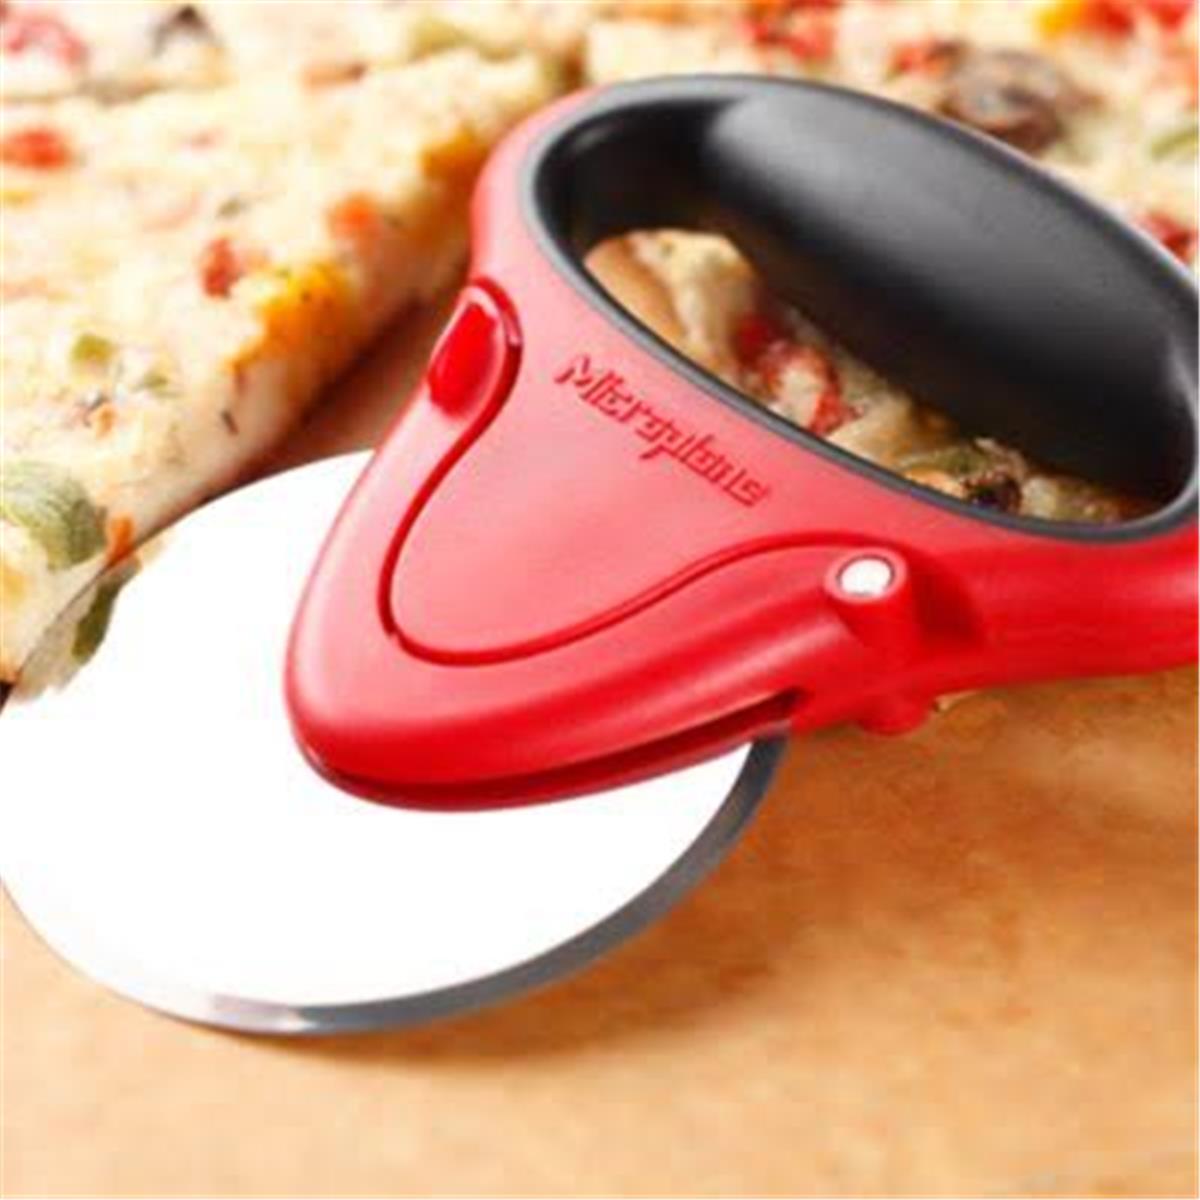 6501472 Easy Prep Pizza Cutter, Red & Black